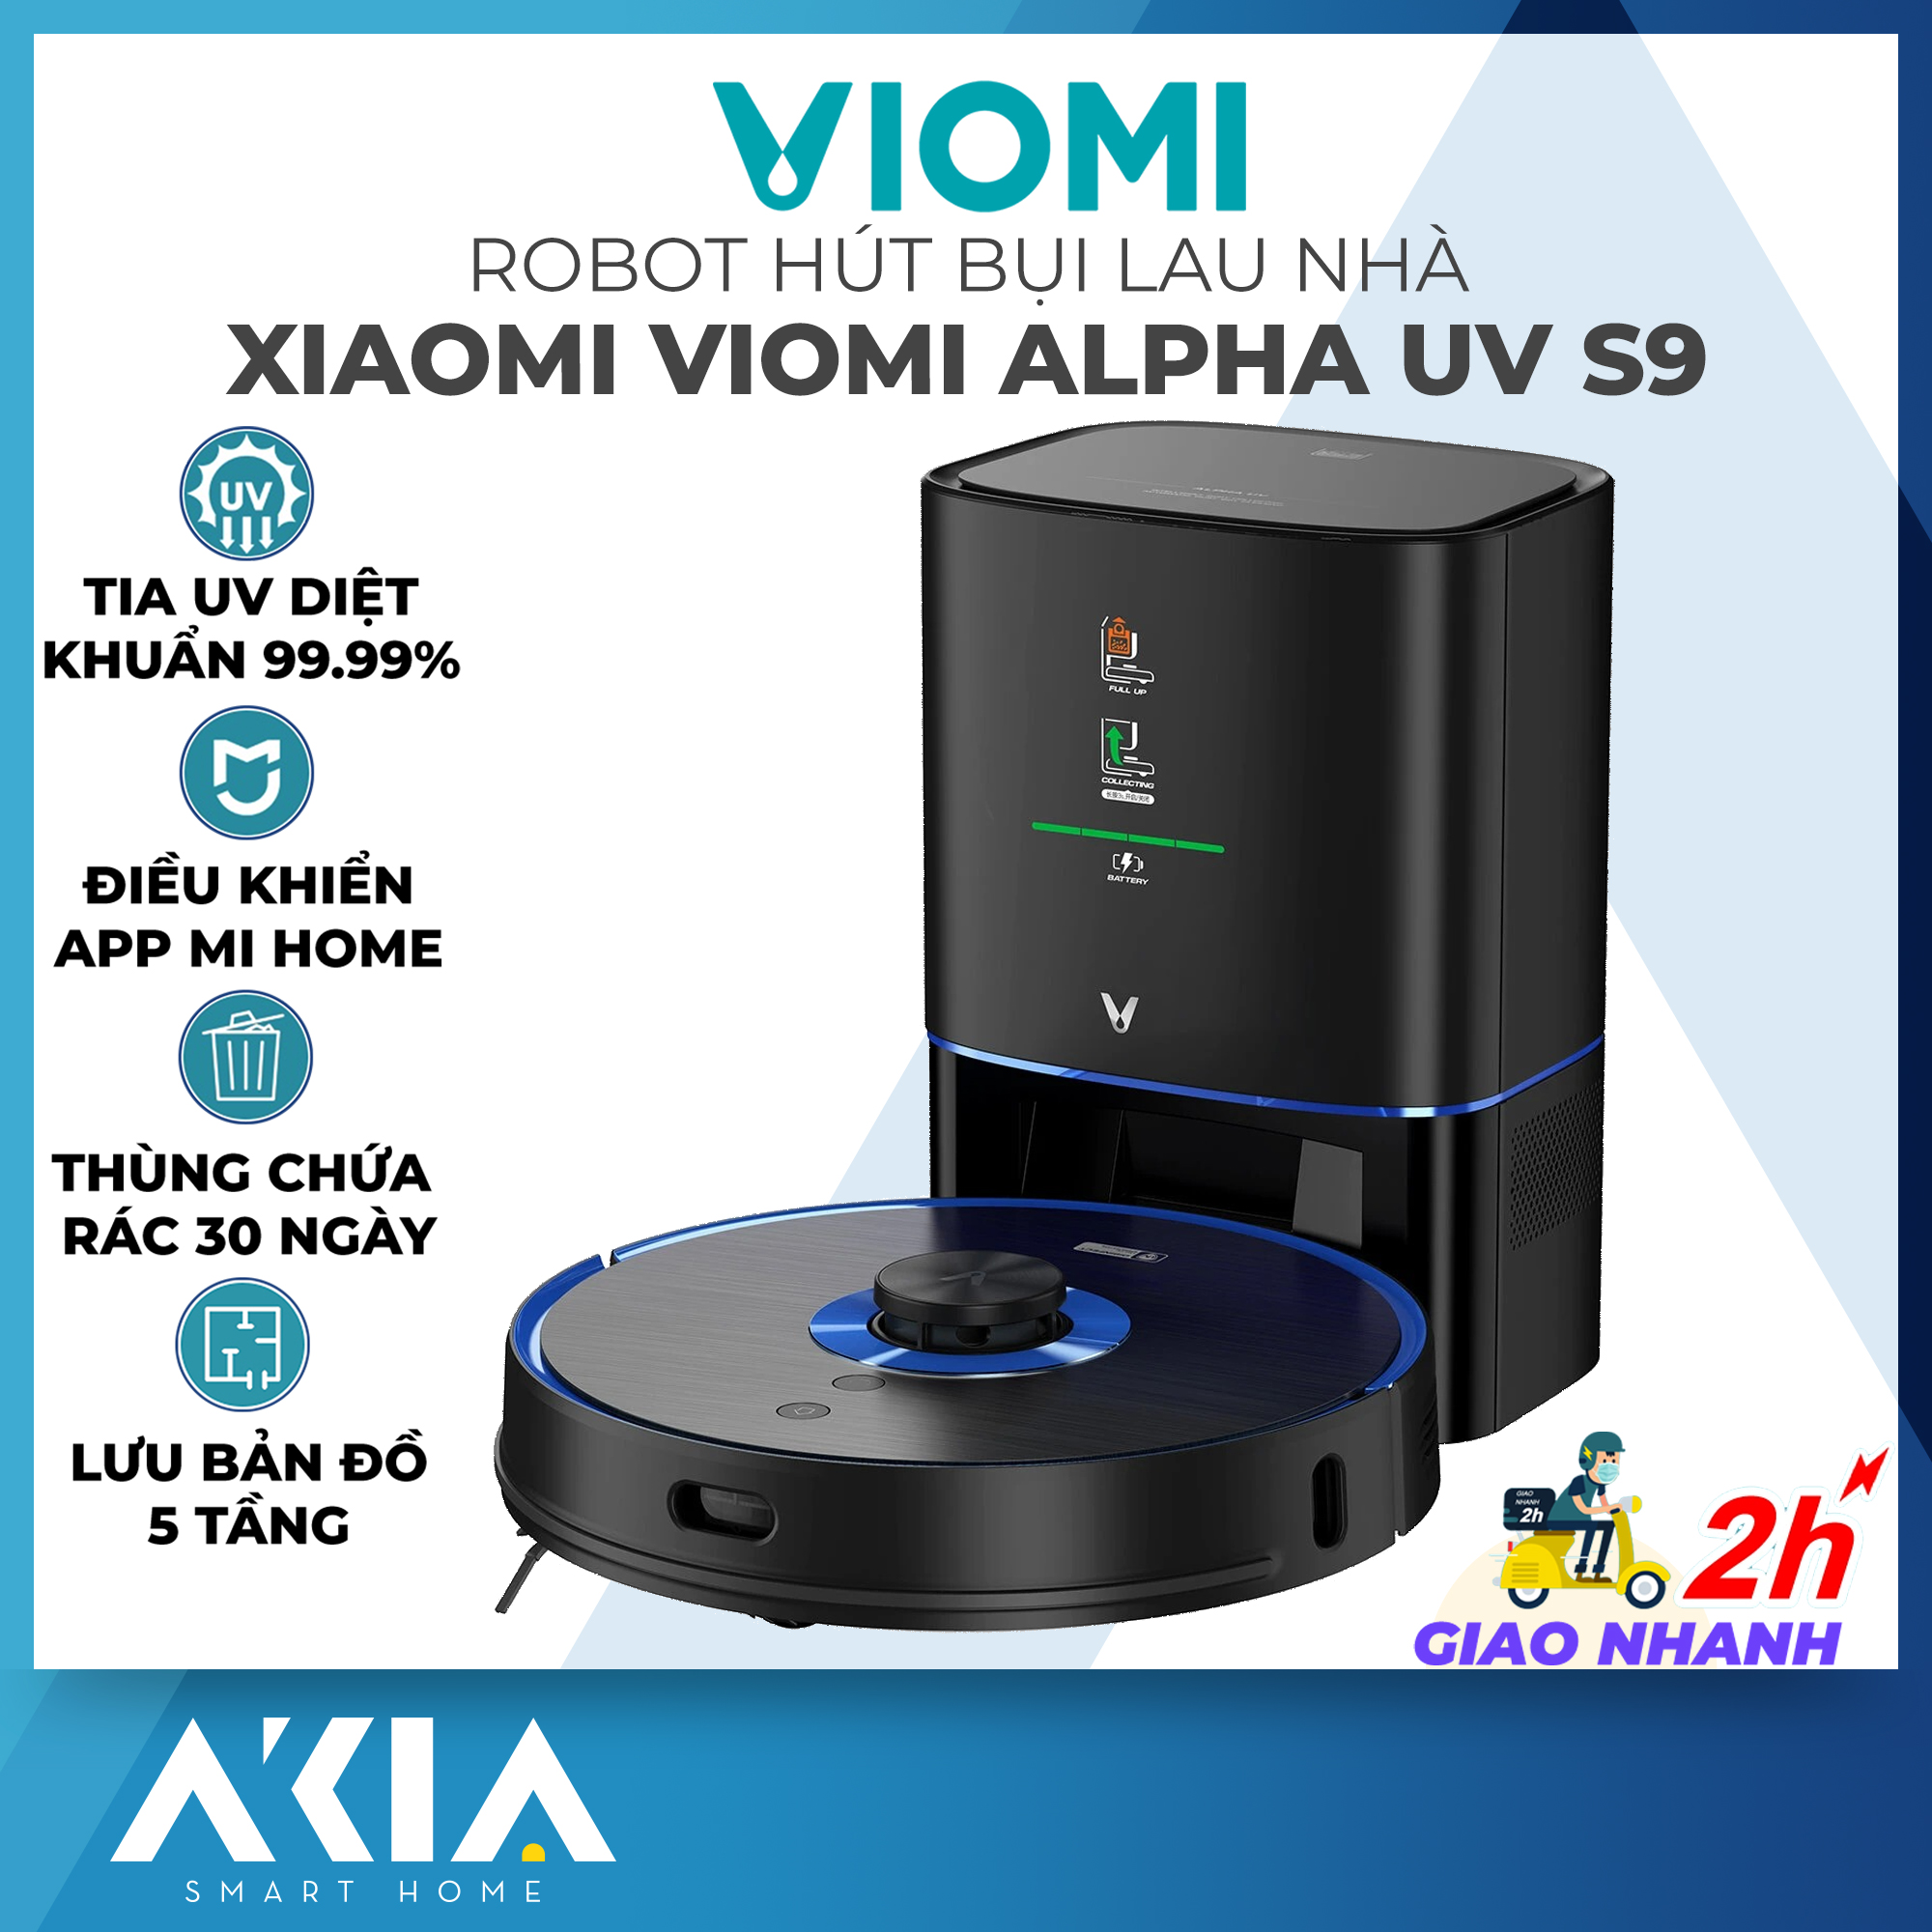 Viomi Alpha UV S9 Steri-cleaning Expert is equipped with UV serialization